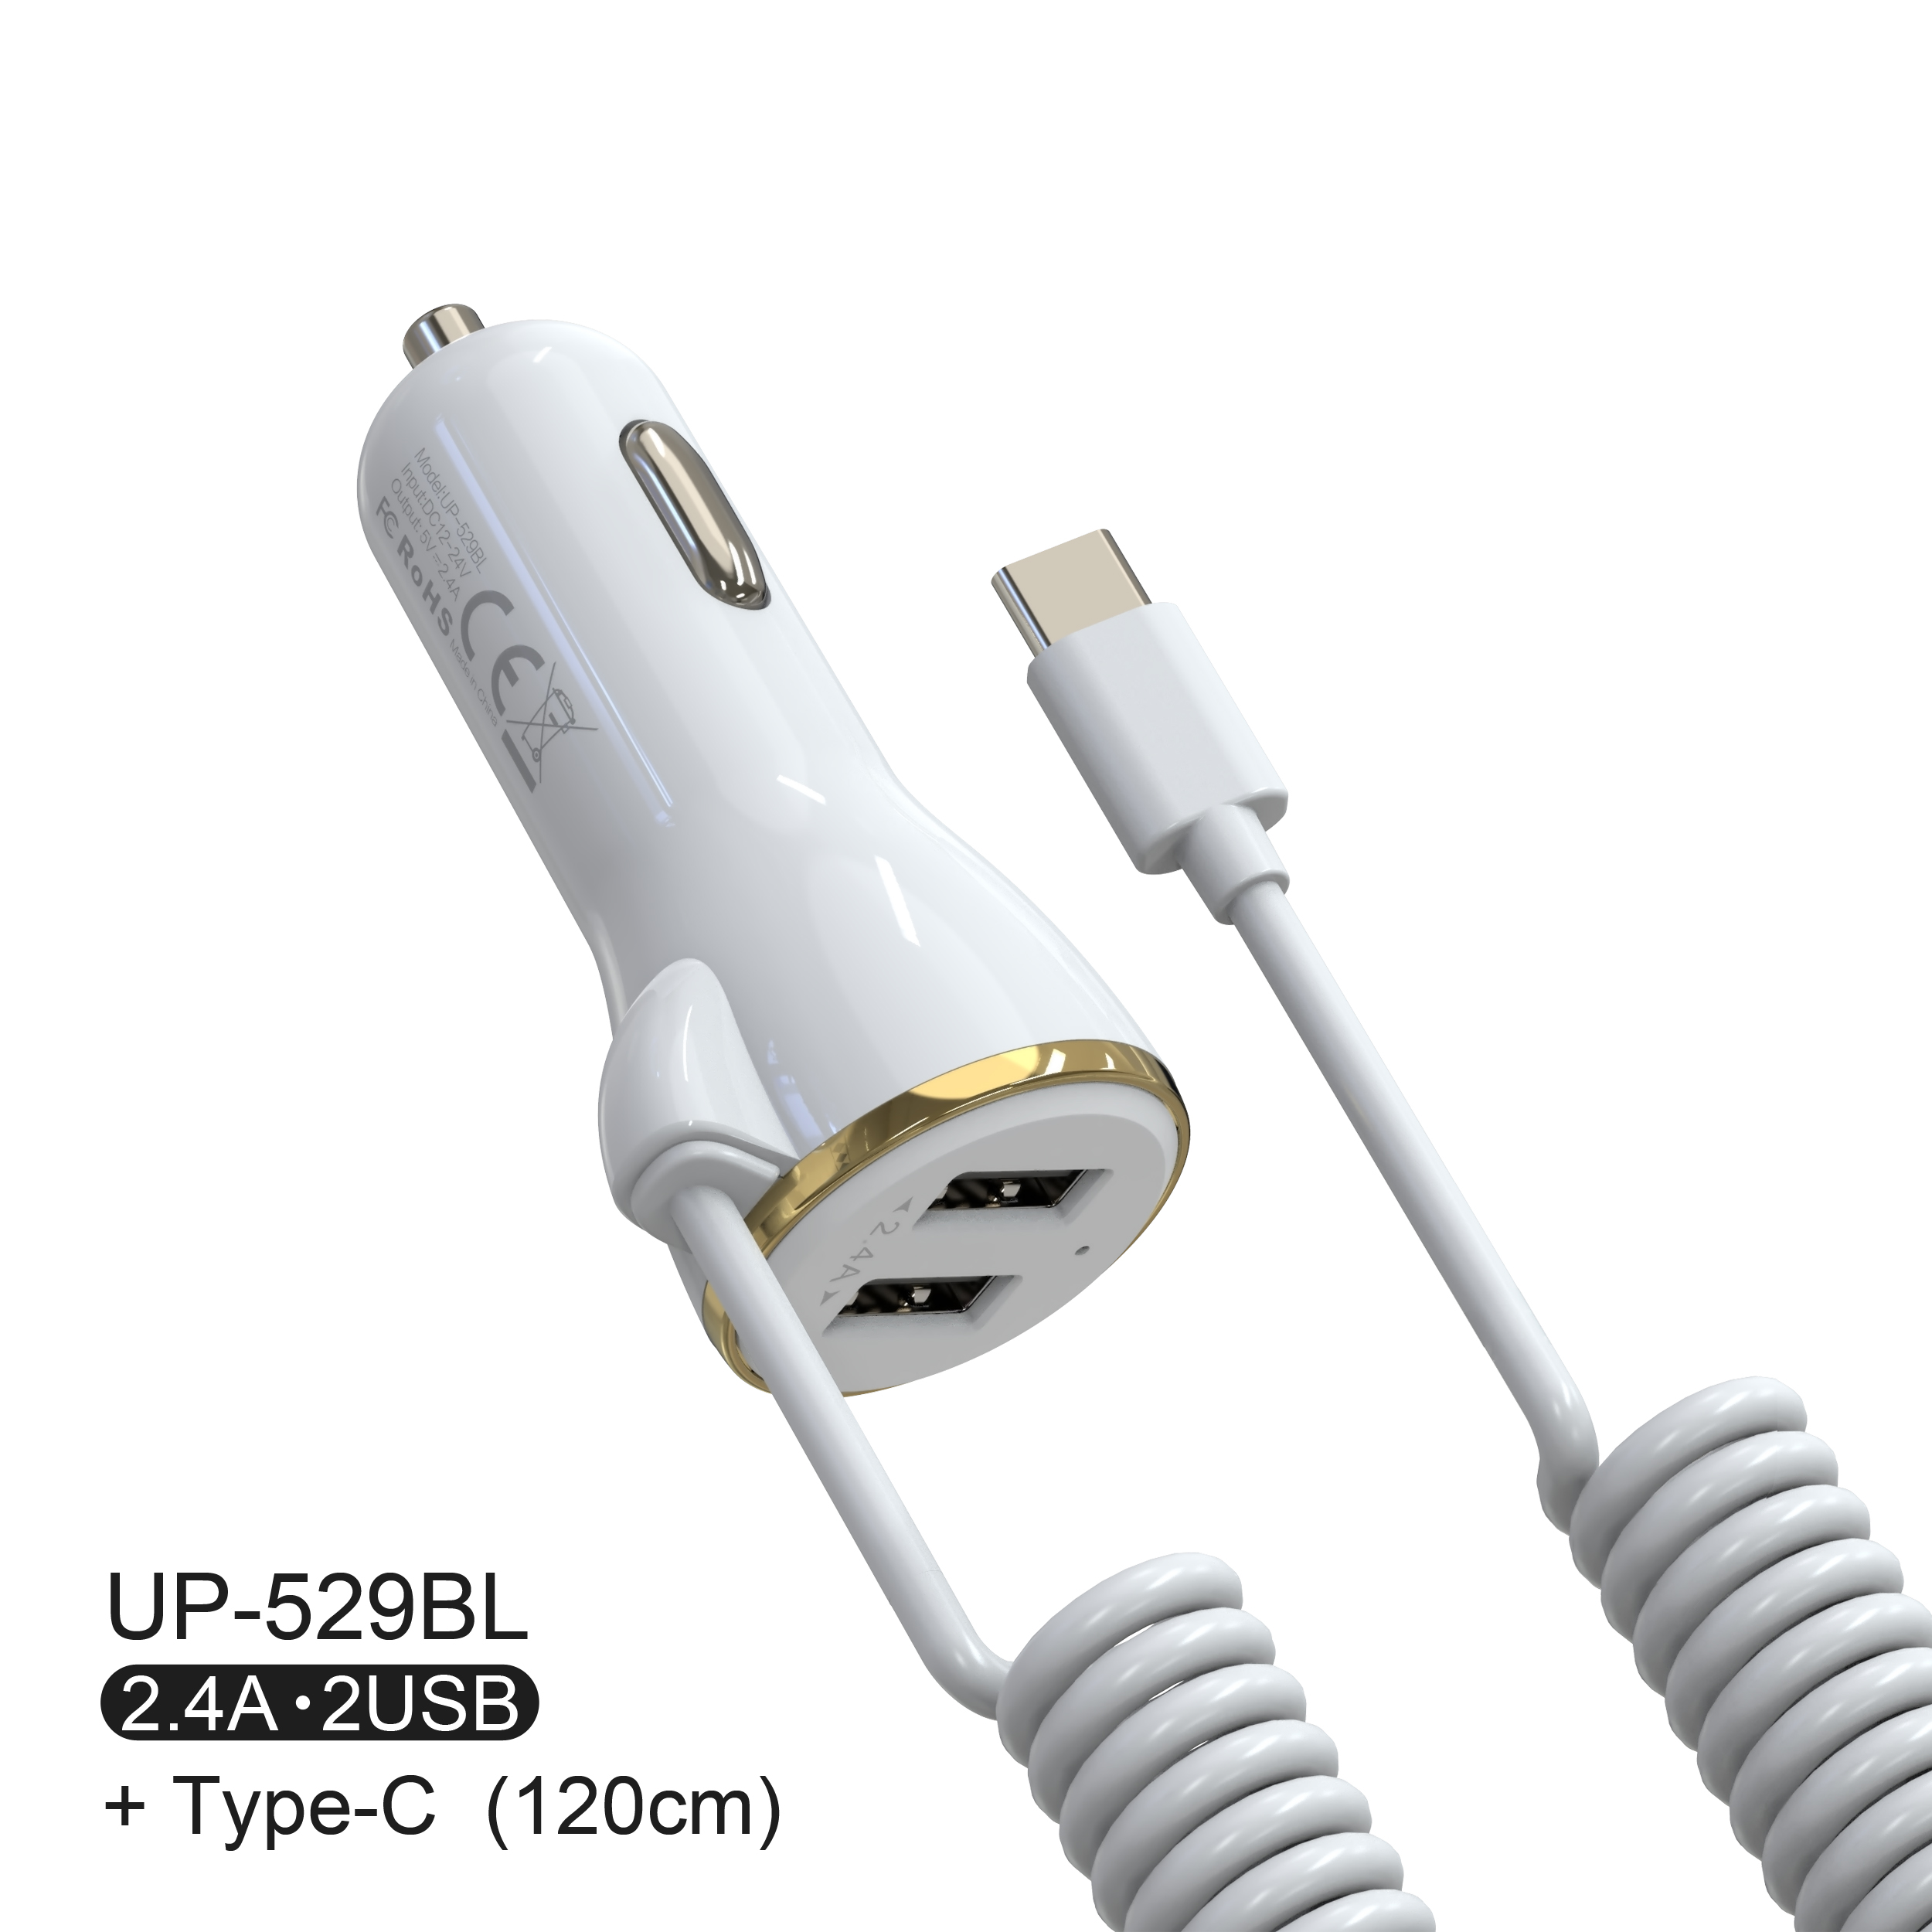 Dual port USB car charger with telescopic Type-c cable Manufacturers, Dual port USB car charger with telescopic Type-c cable Factory, Supply Dual port USB car charger with telescopic Type-c cable